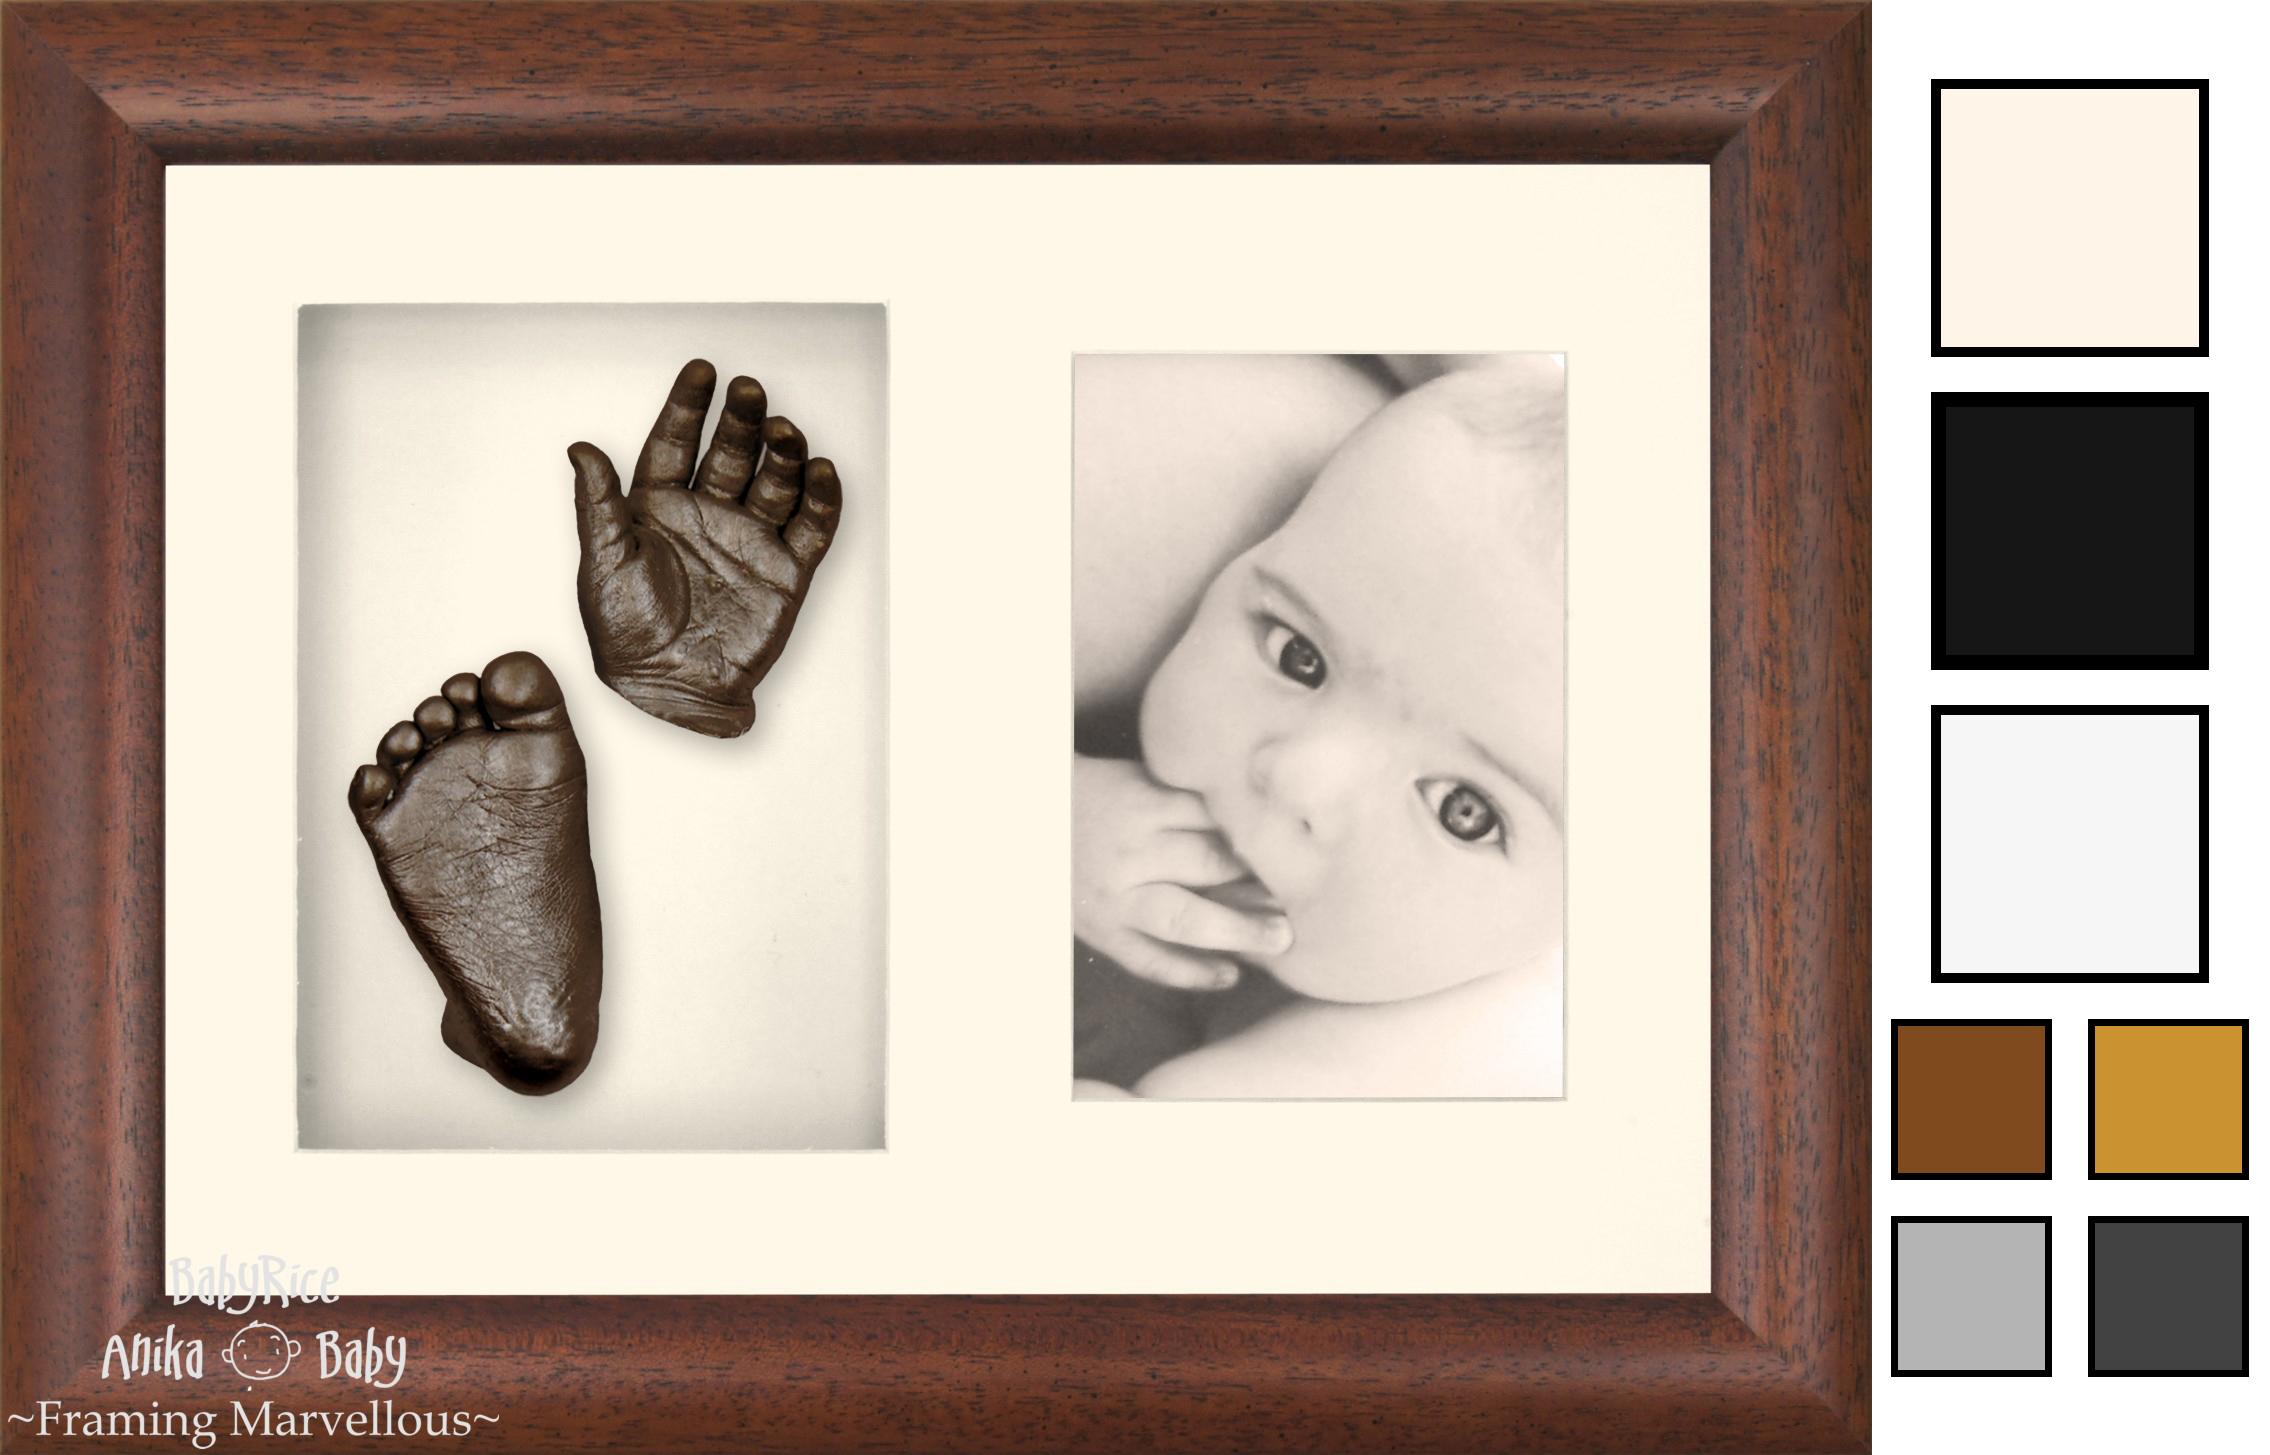 Baby Casting Kit with Dark Wooden Frame – Hand Foot Mould Display